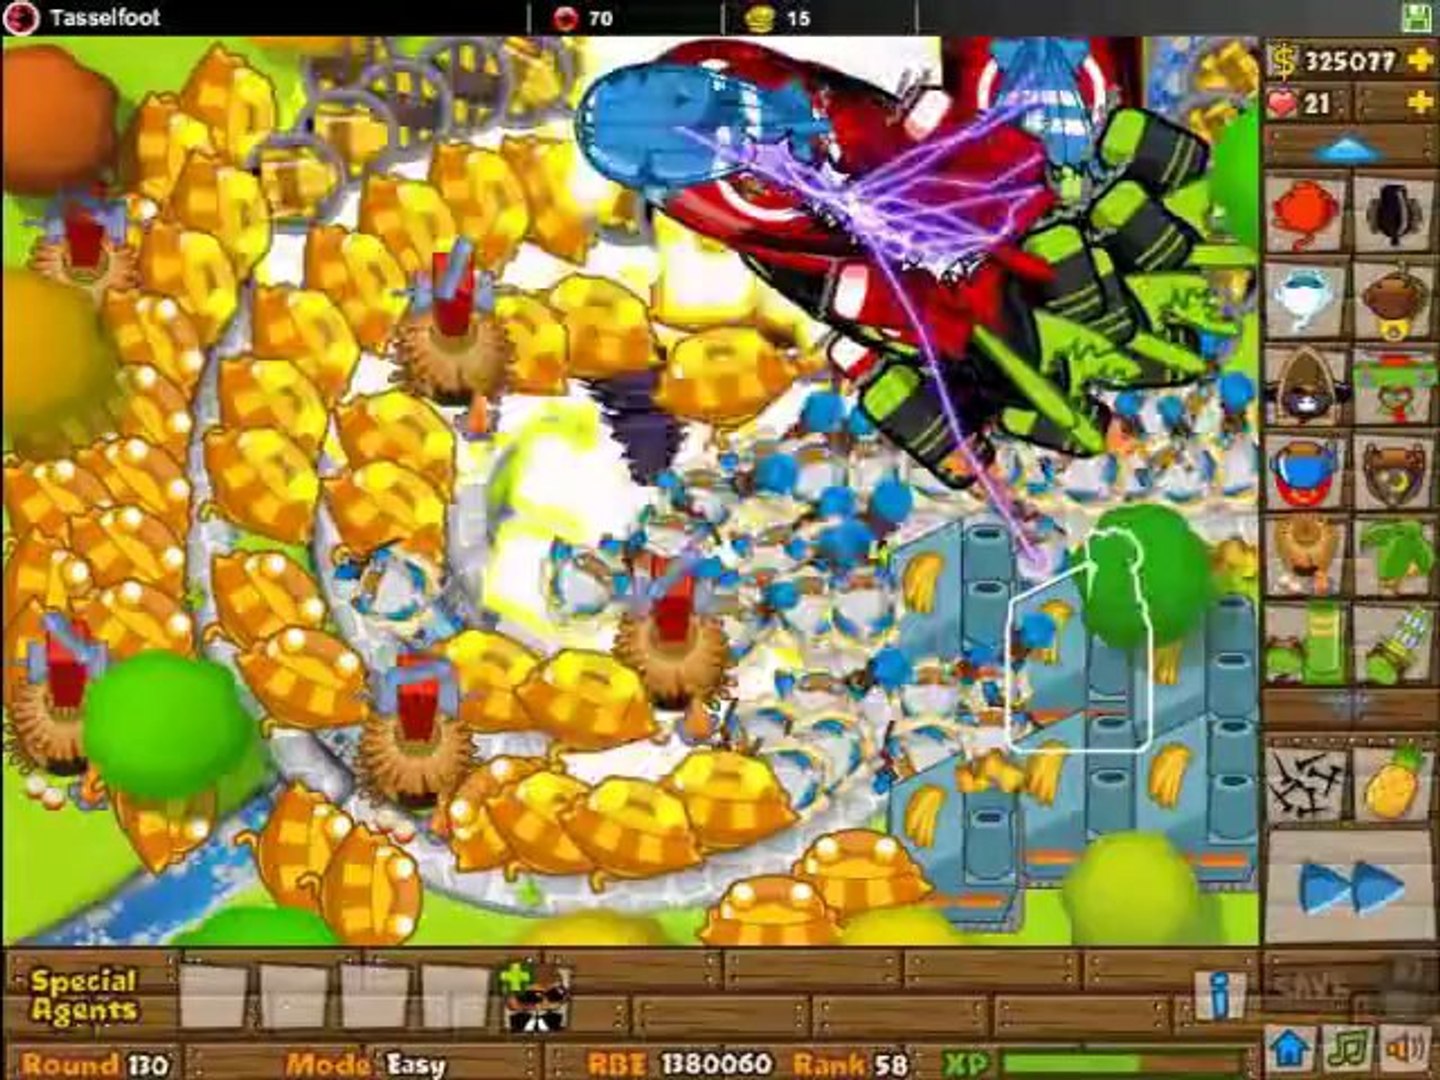 BTD5 Bloons Tower Defense 5 Walkthrough - Easy Mode - Rounds 100, 110, 120, & 130 - Dailymotion